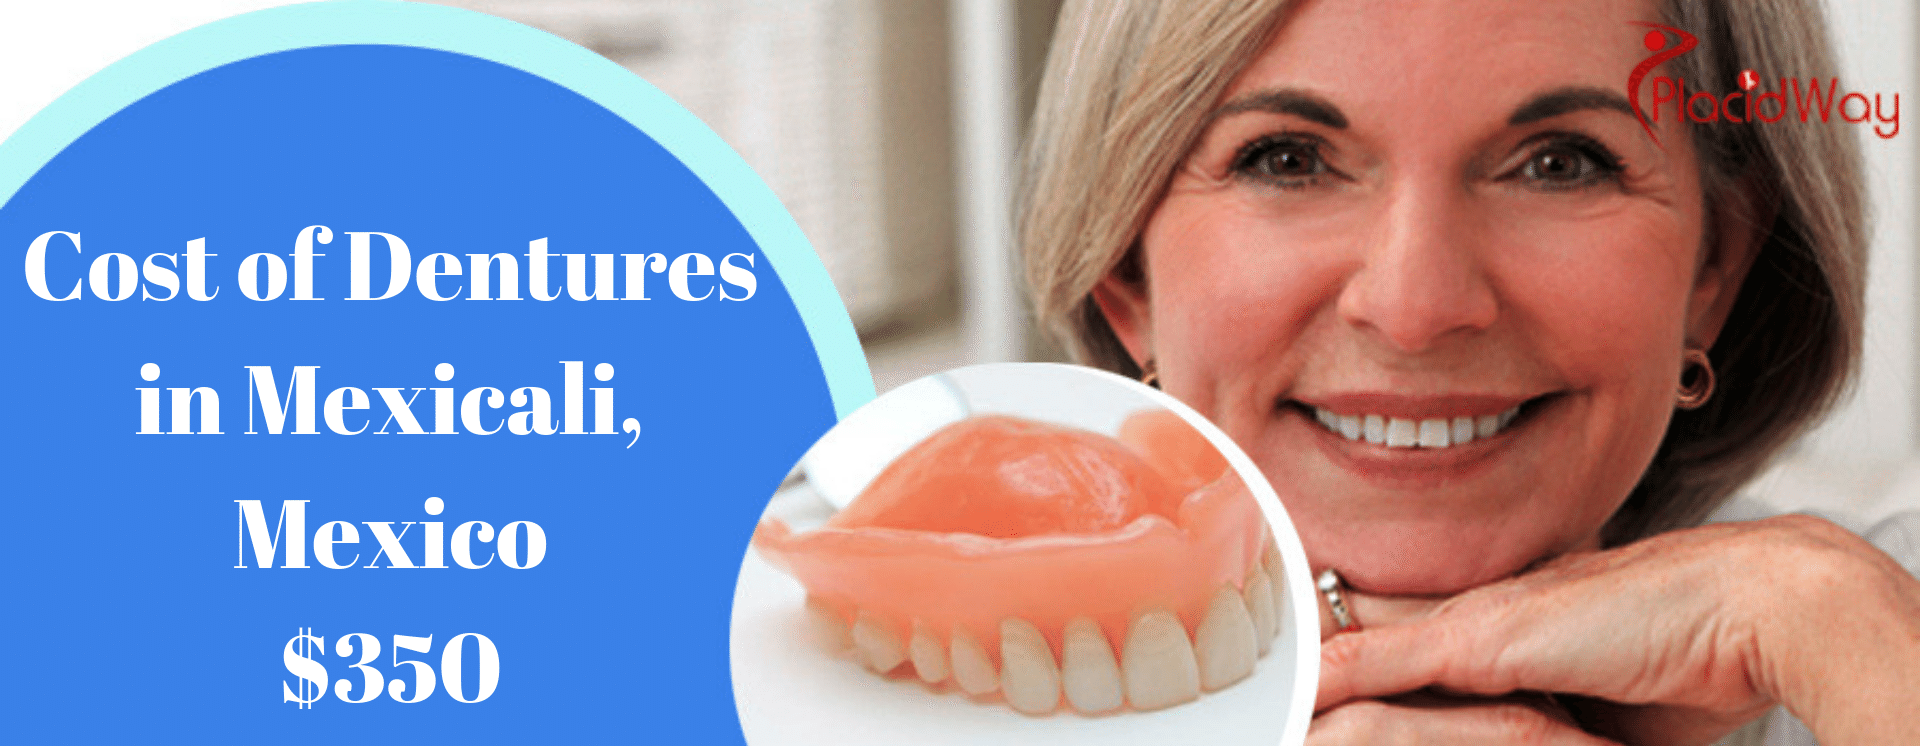 Cost of Dentures in Mexicali, Mexico